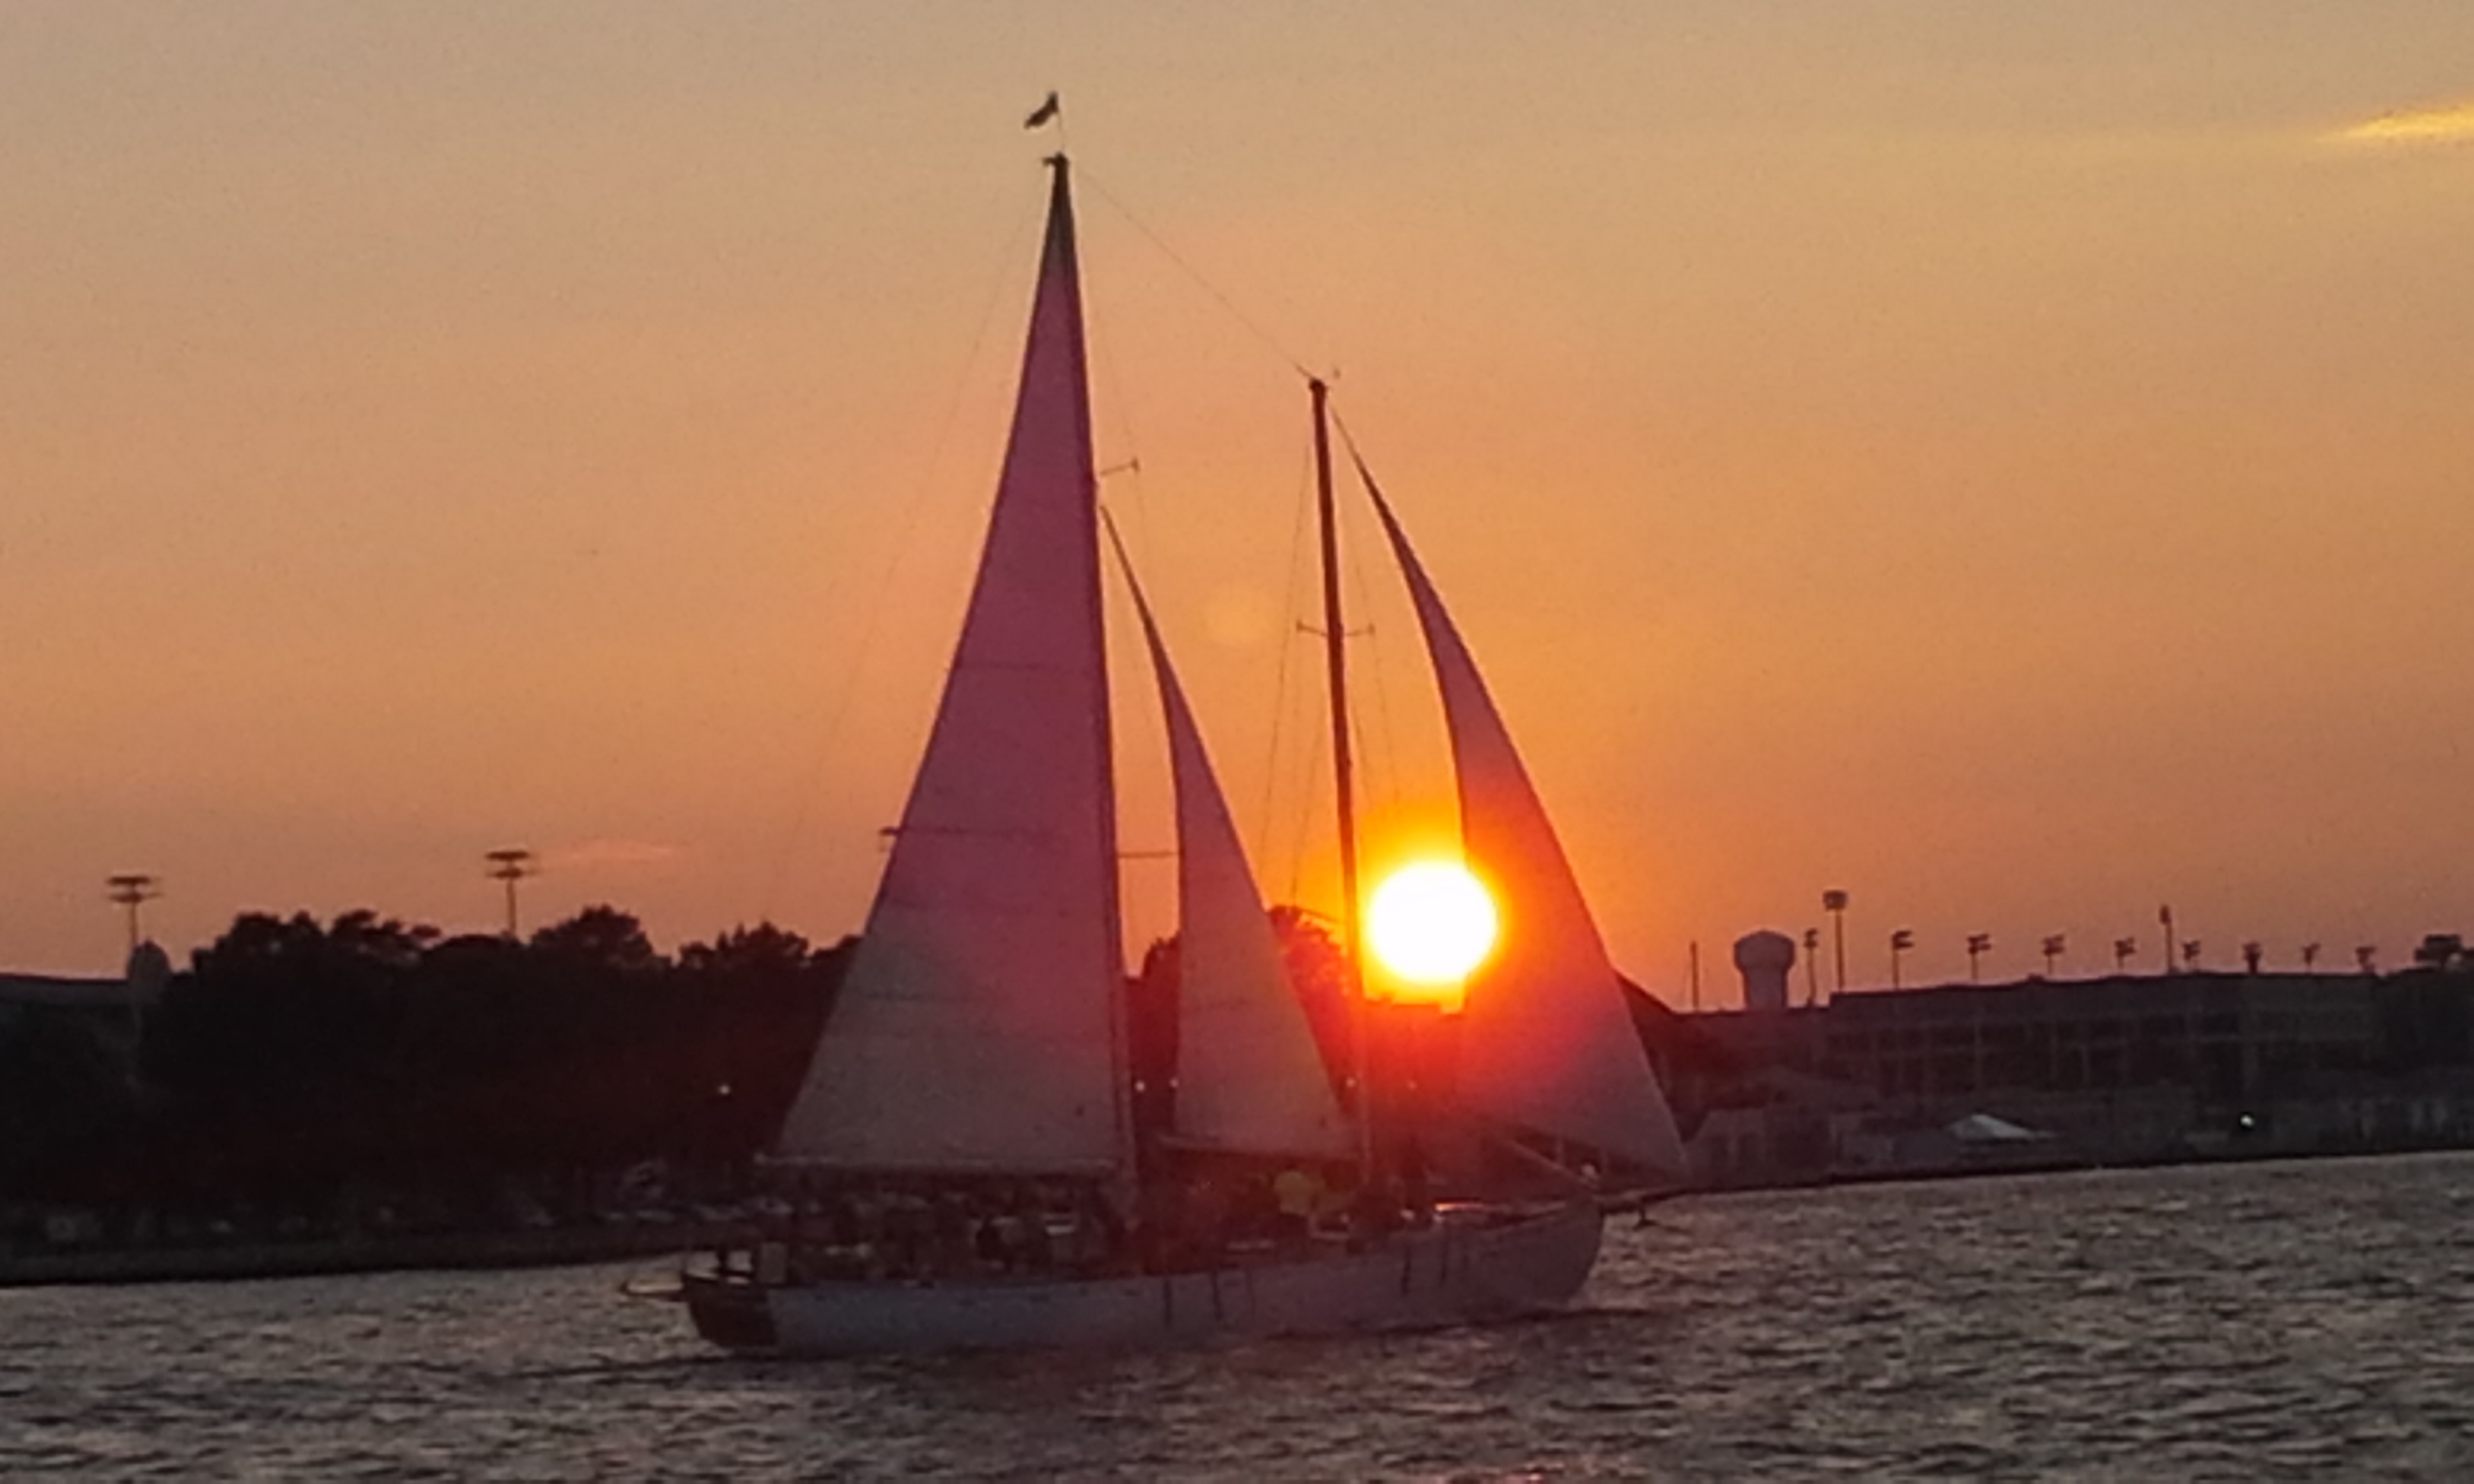 The sunset blazing from in between the sails of the schooner